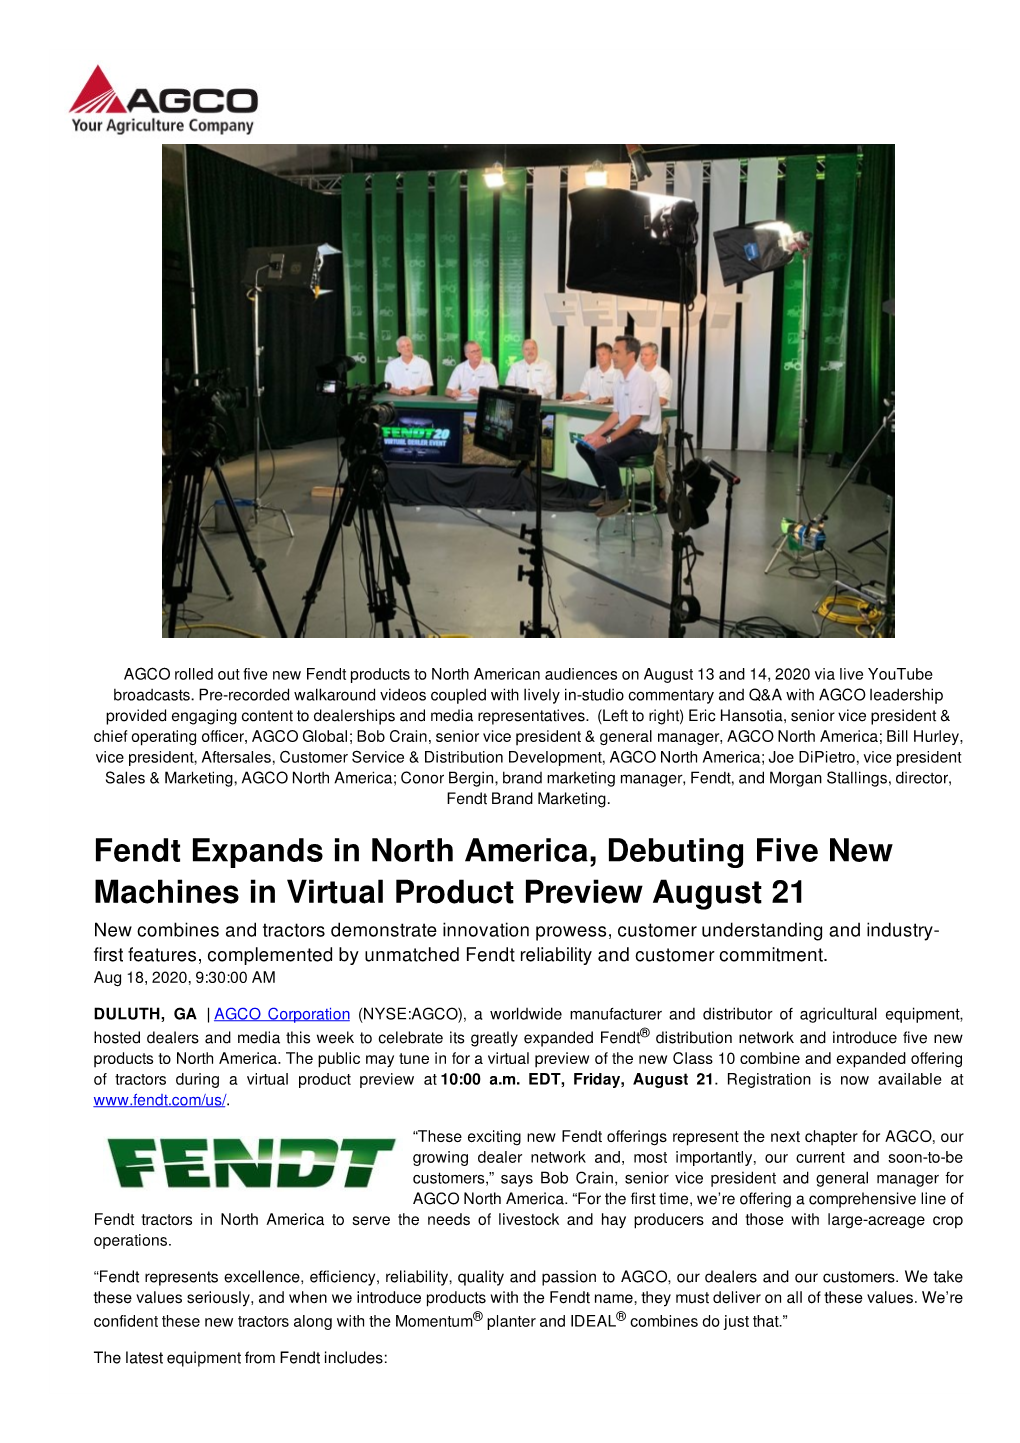 Fendt Expands in North America, Debuting Five New Machines in Virtual Product Preview August 21